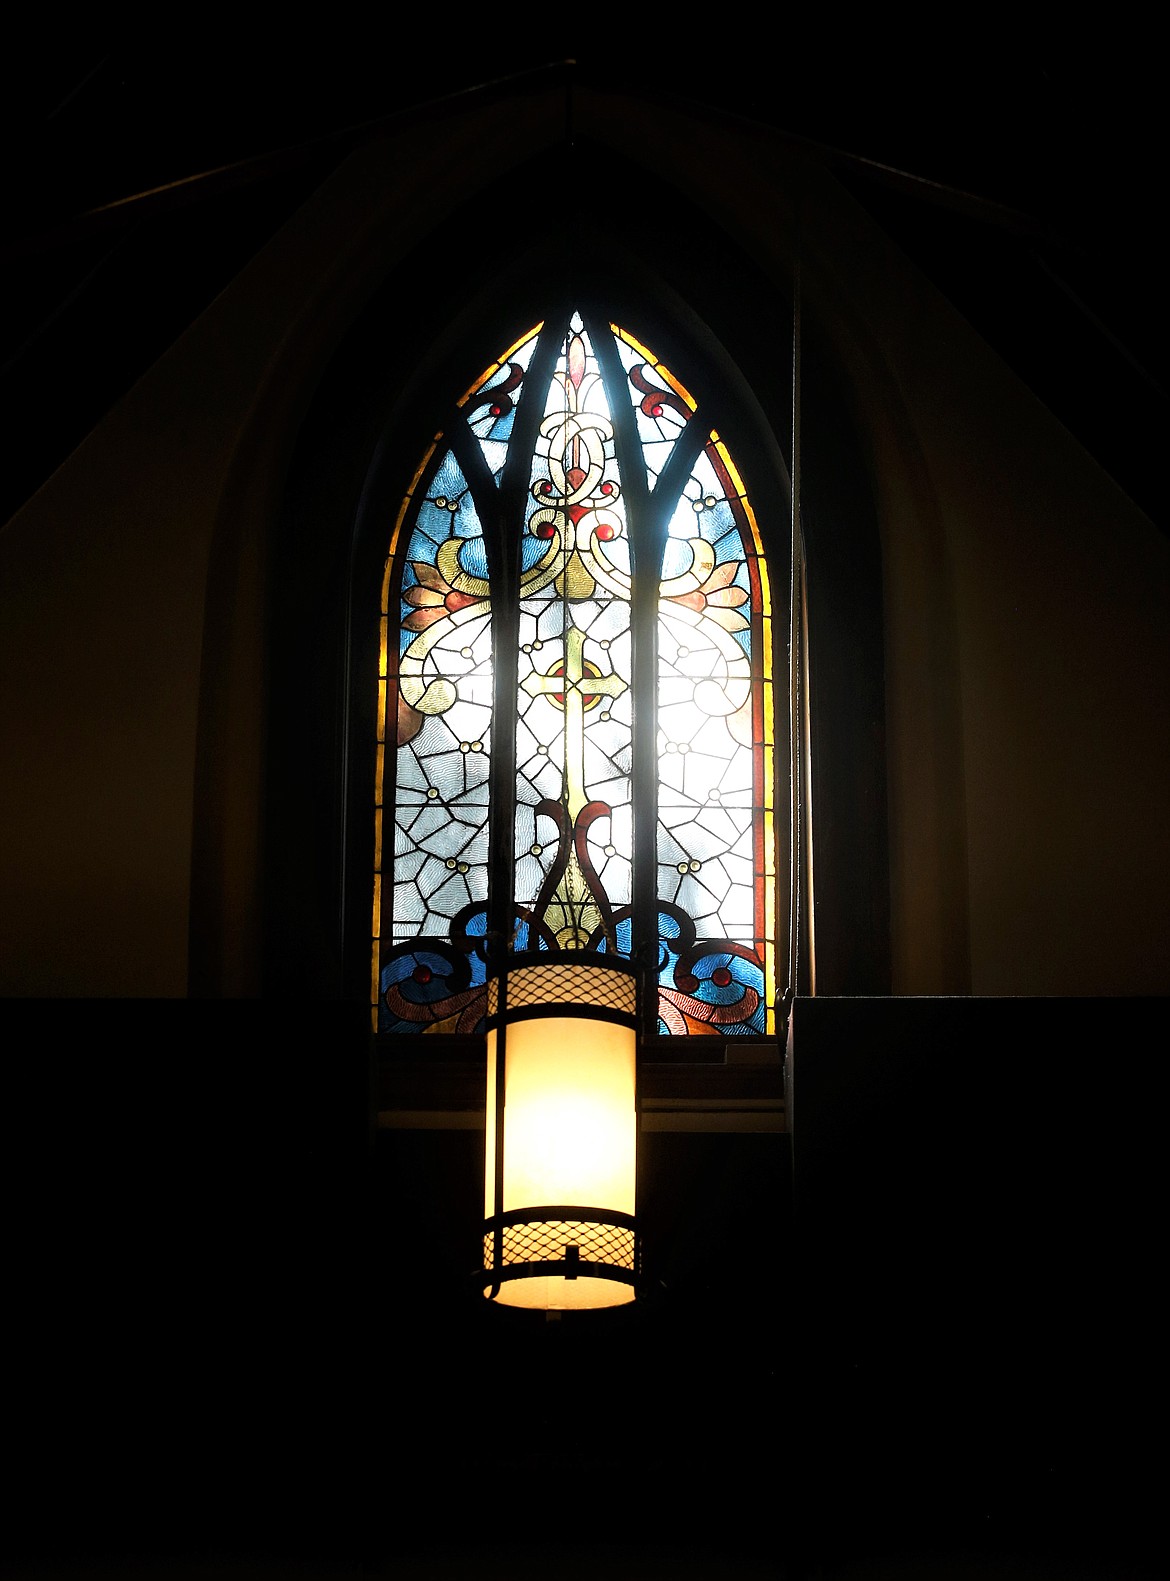 Light shines in a stained-glass window at St. Luke's Episcopal Church on Friday.